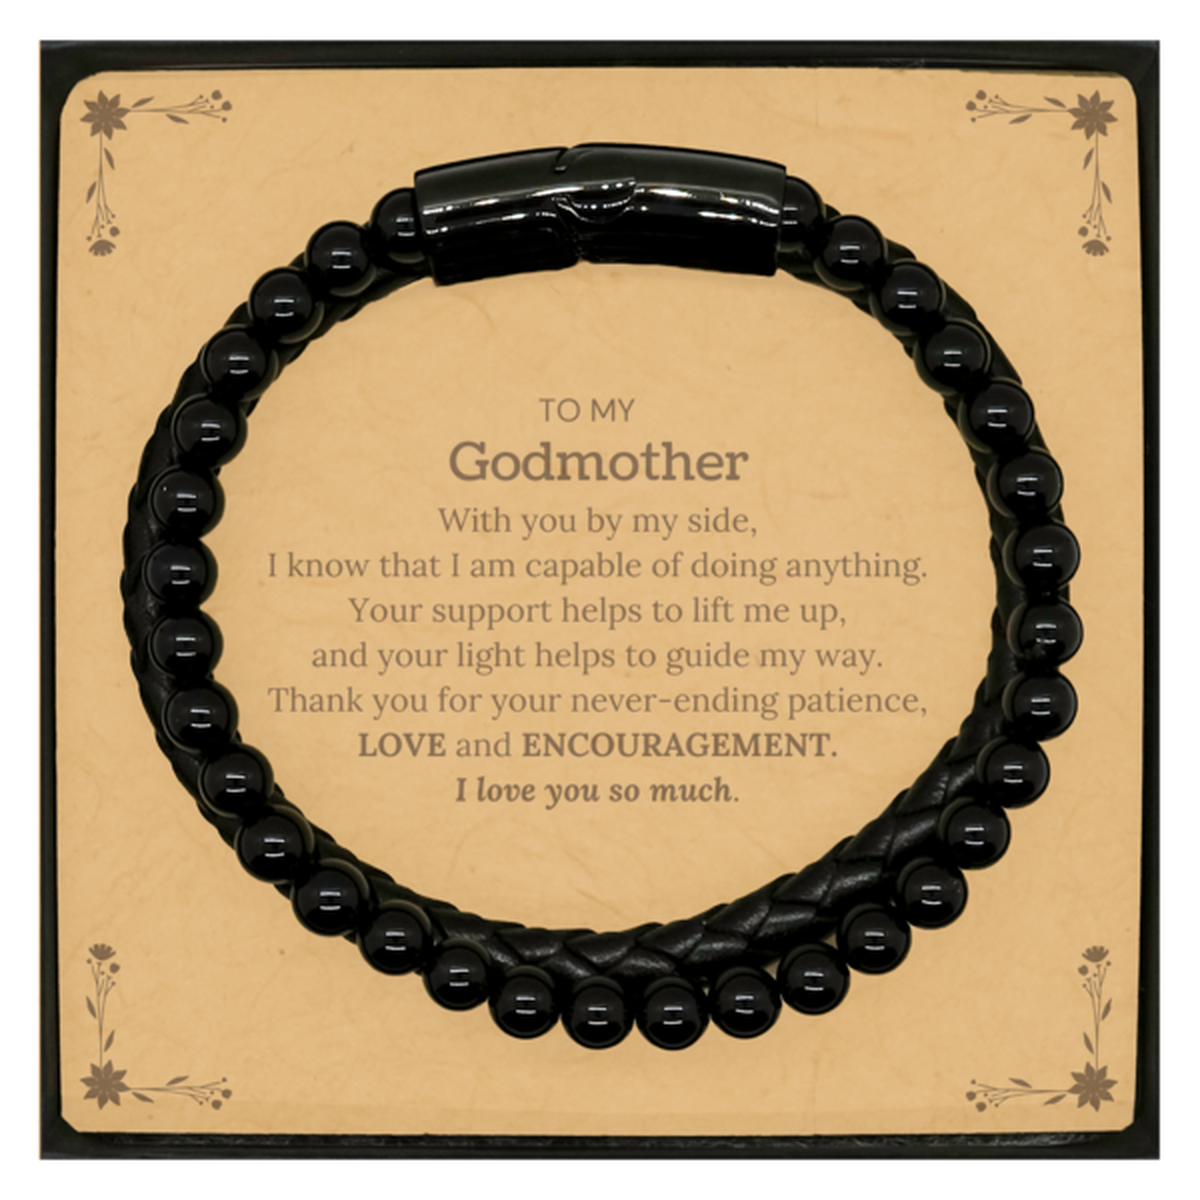 Appreciation Godmother Stone Leather Bracelets Gifts, To My Godmother Birthday Christmas Wedding Keepsake Gifts for Godmother With you by my side, I know that I am capable of doing anything. I love you so much